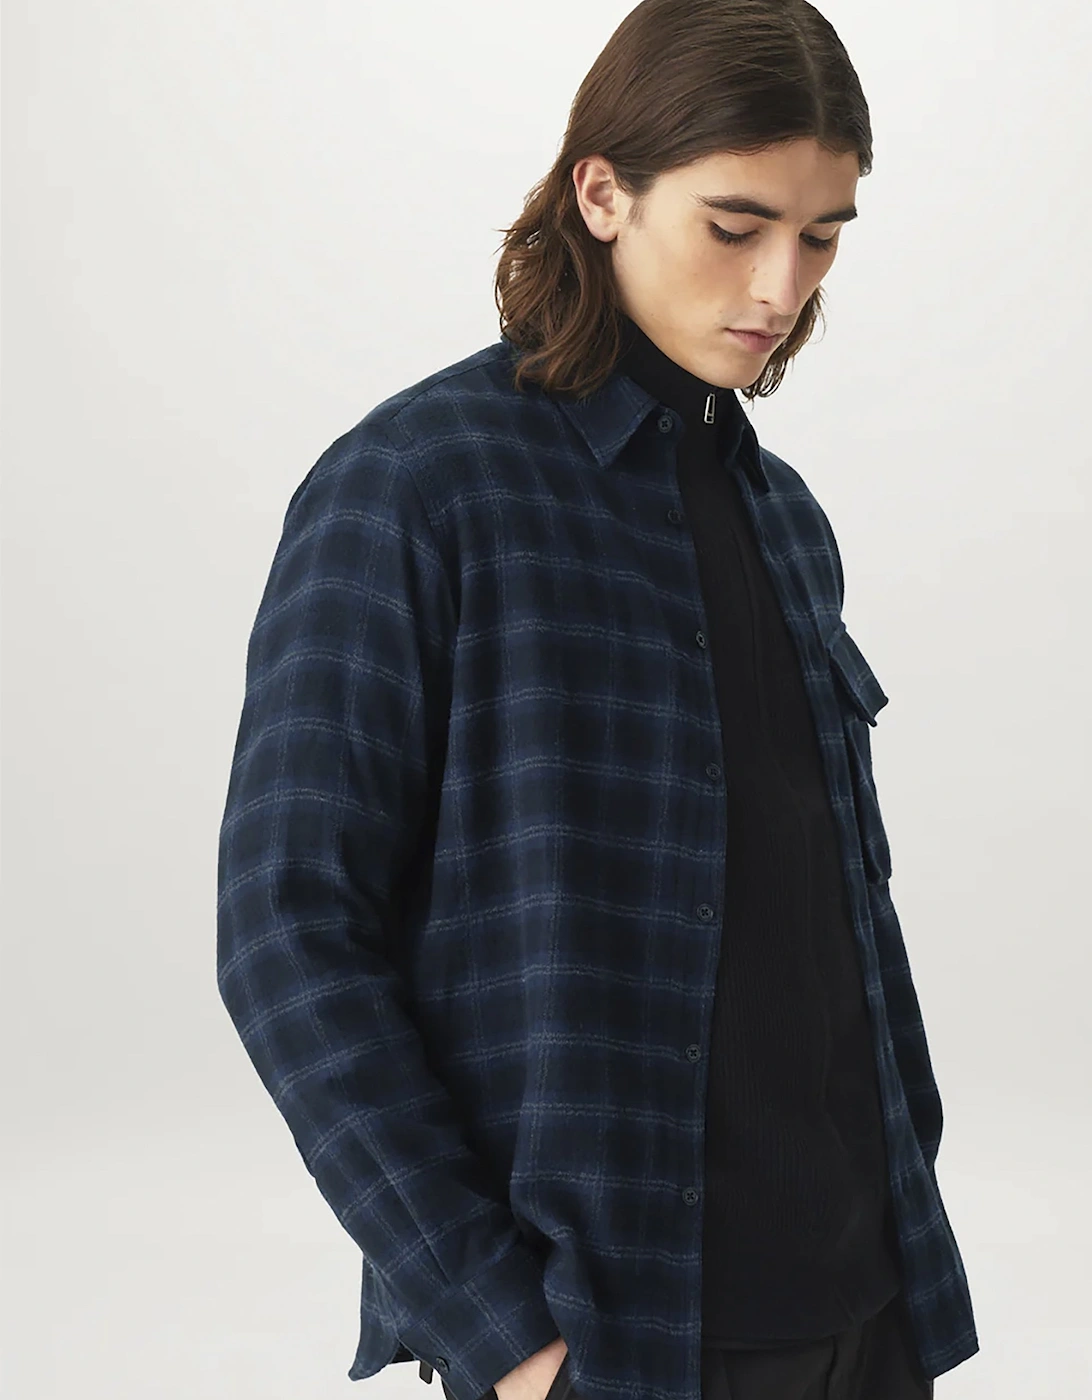 Scale Check Shirt Navy